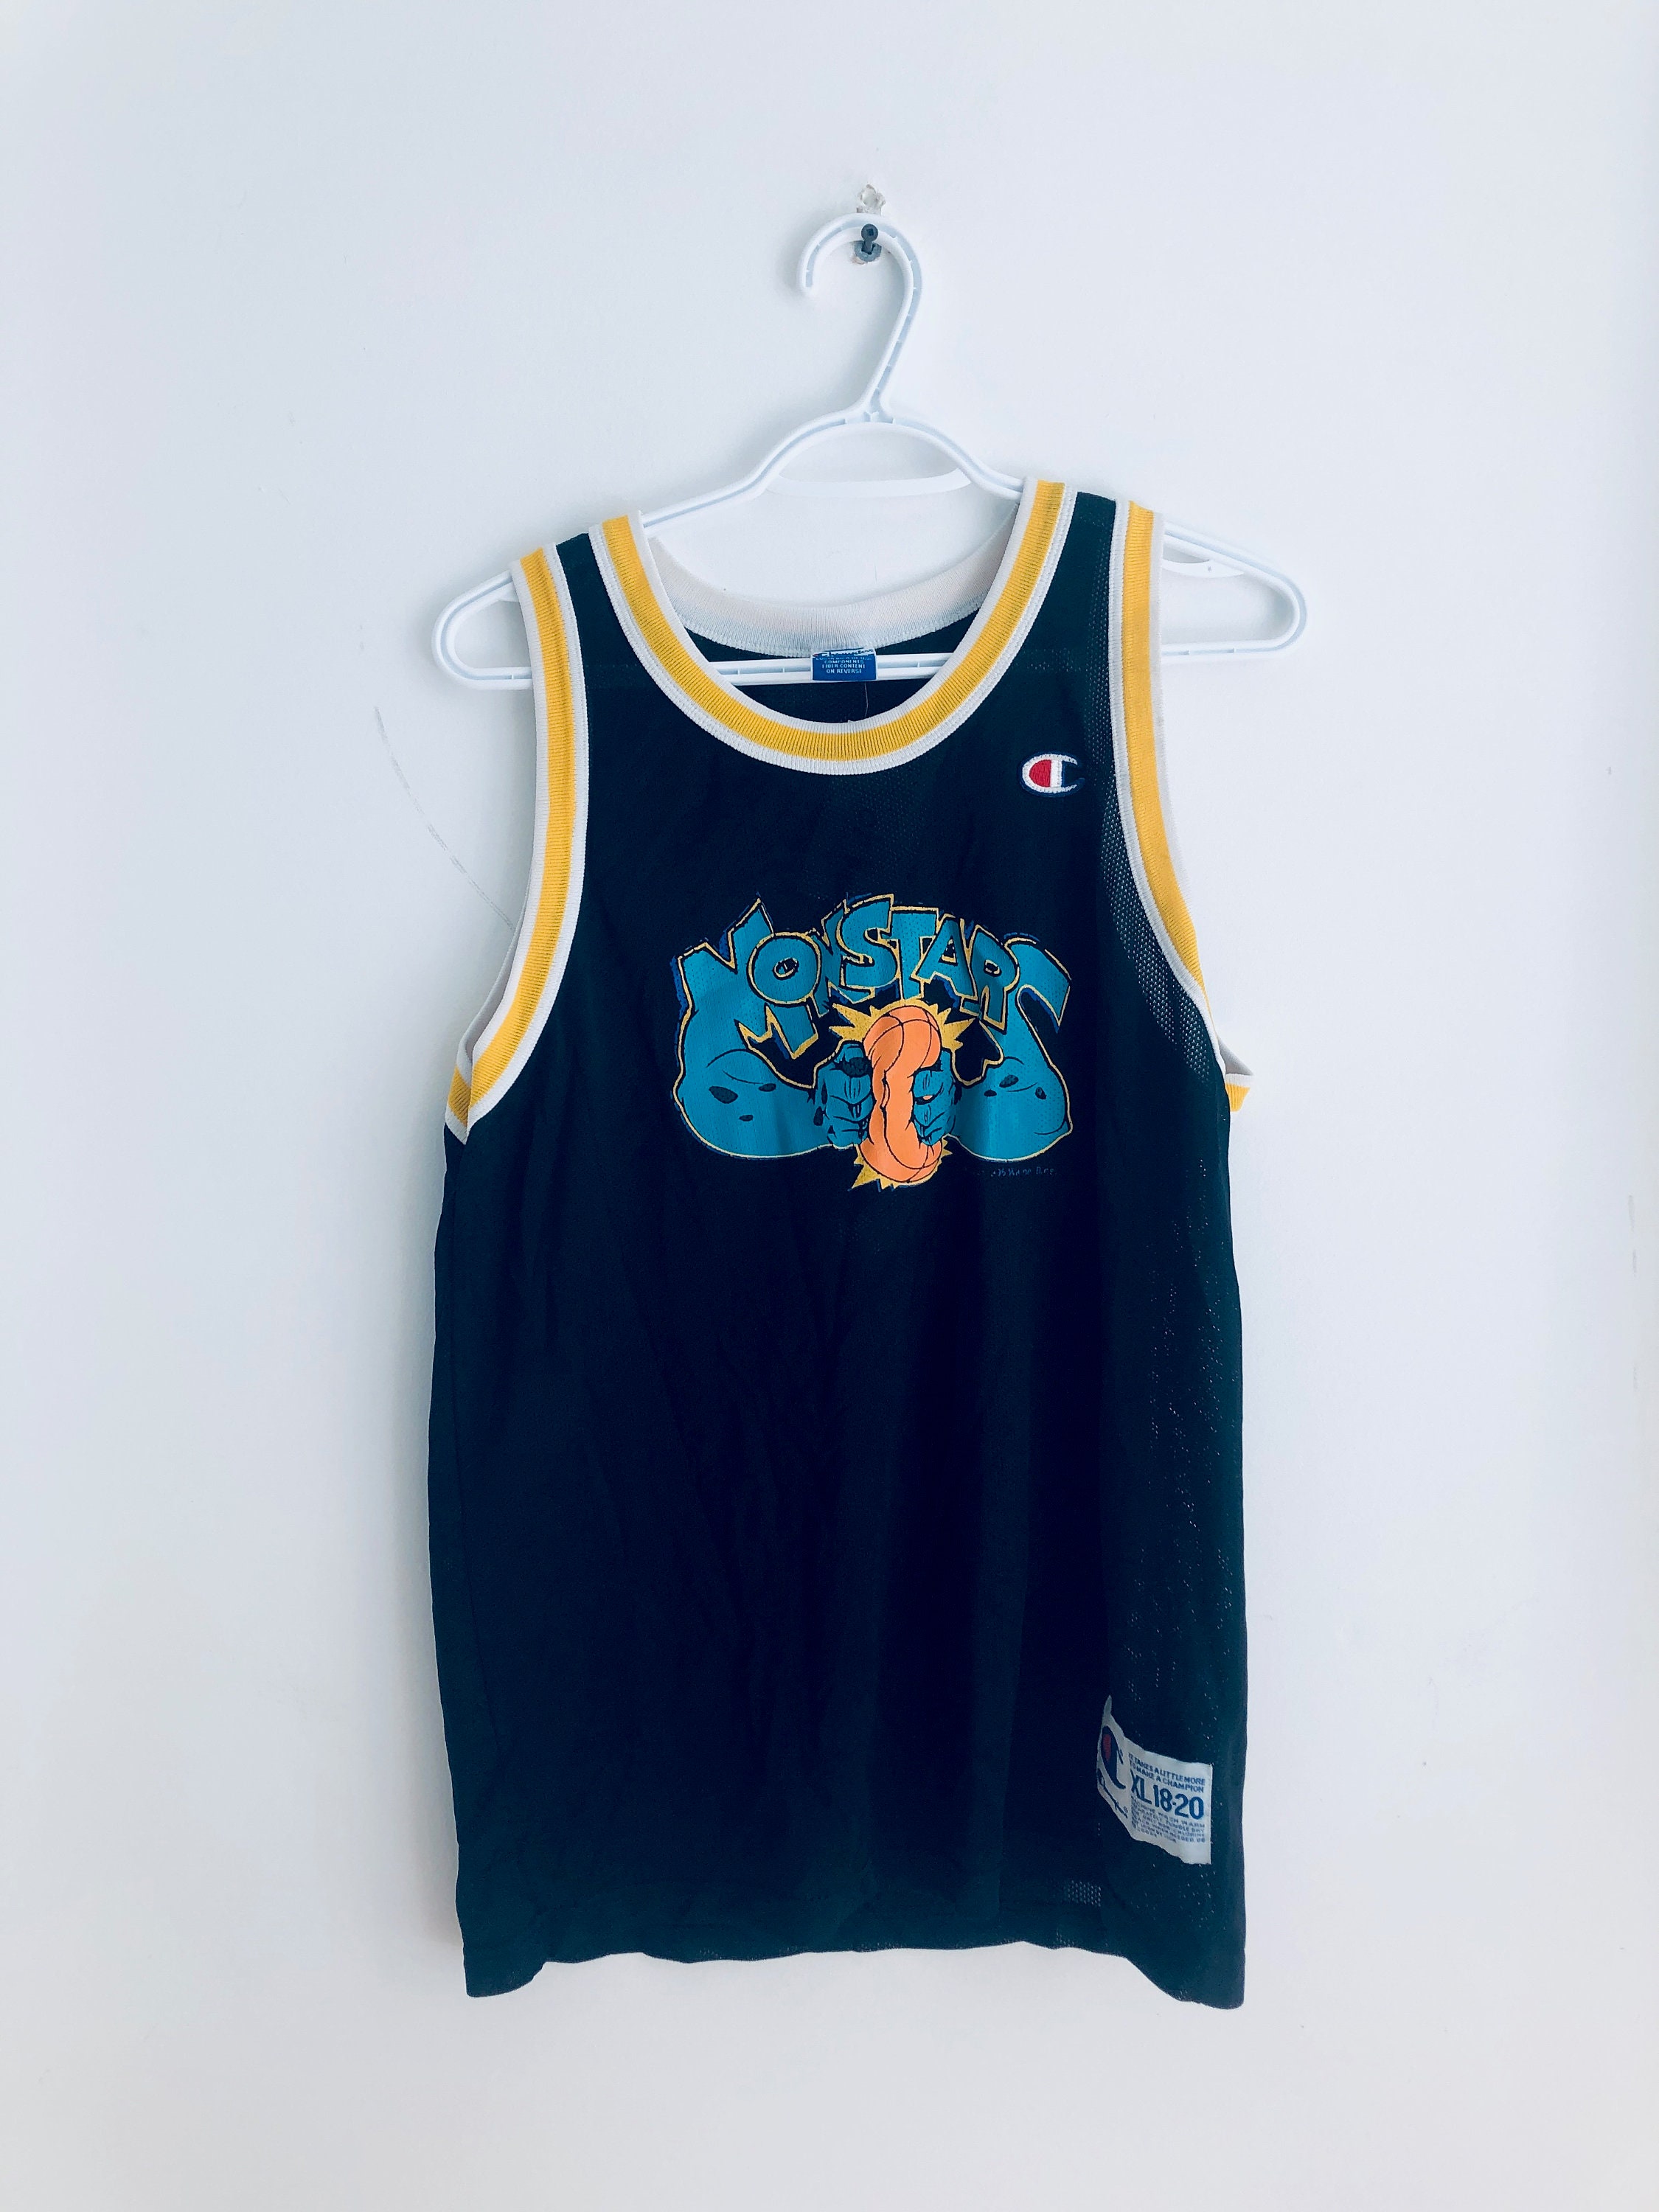 Muggsy Bogues Signed Space Jam Tune Squad Jersey (PSA COA